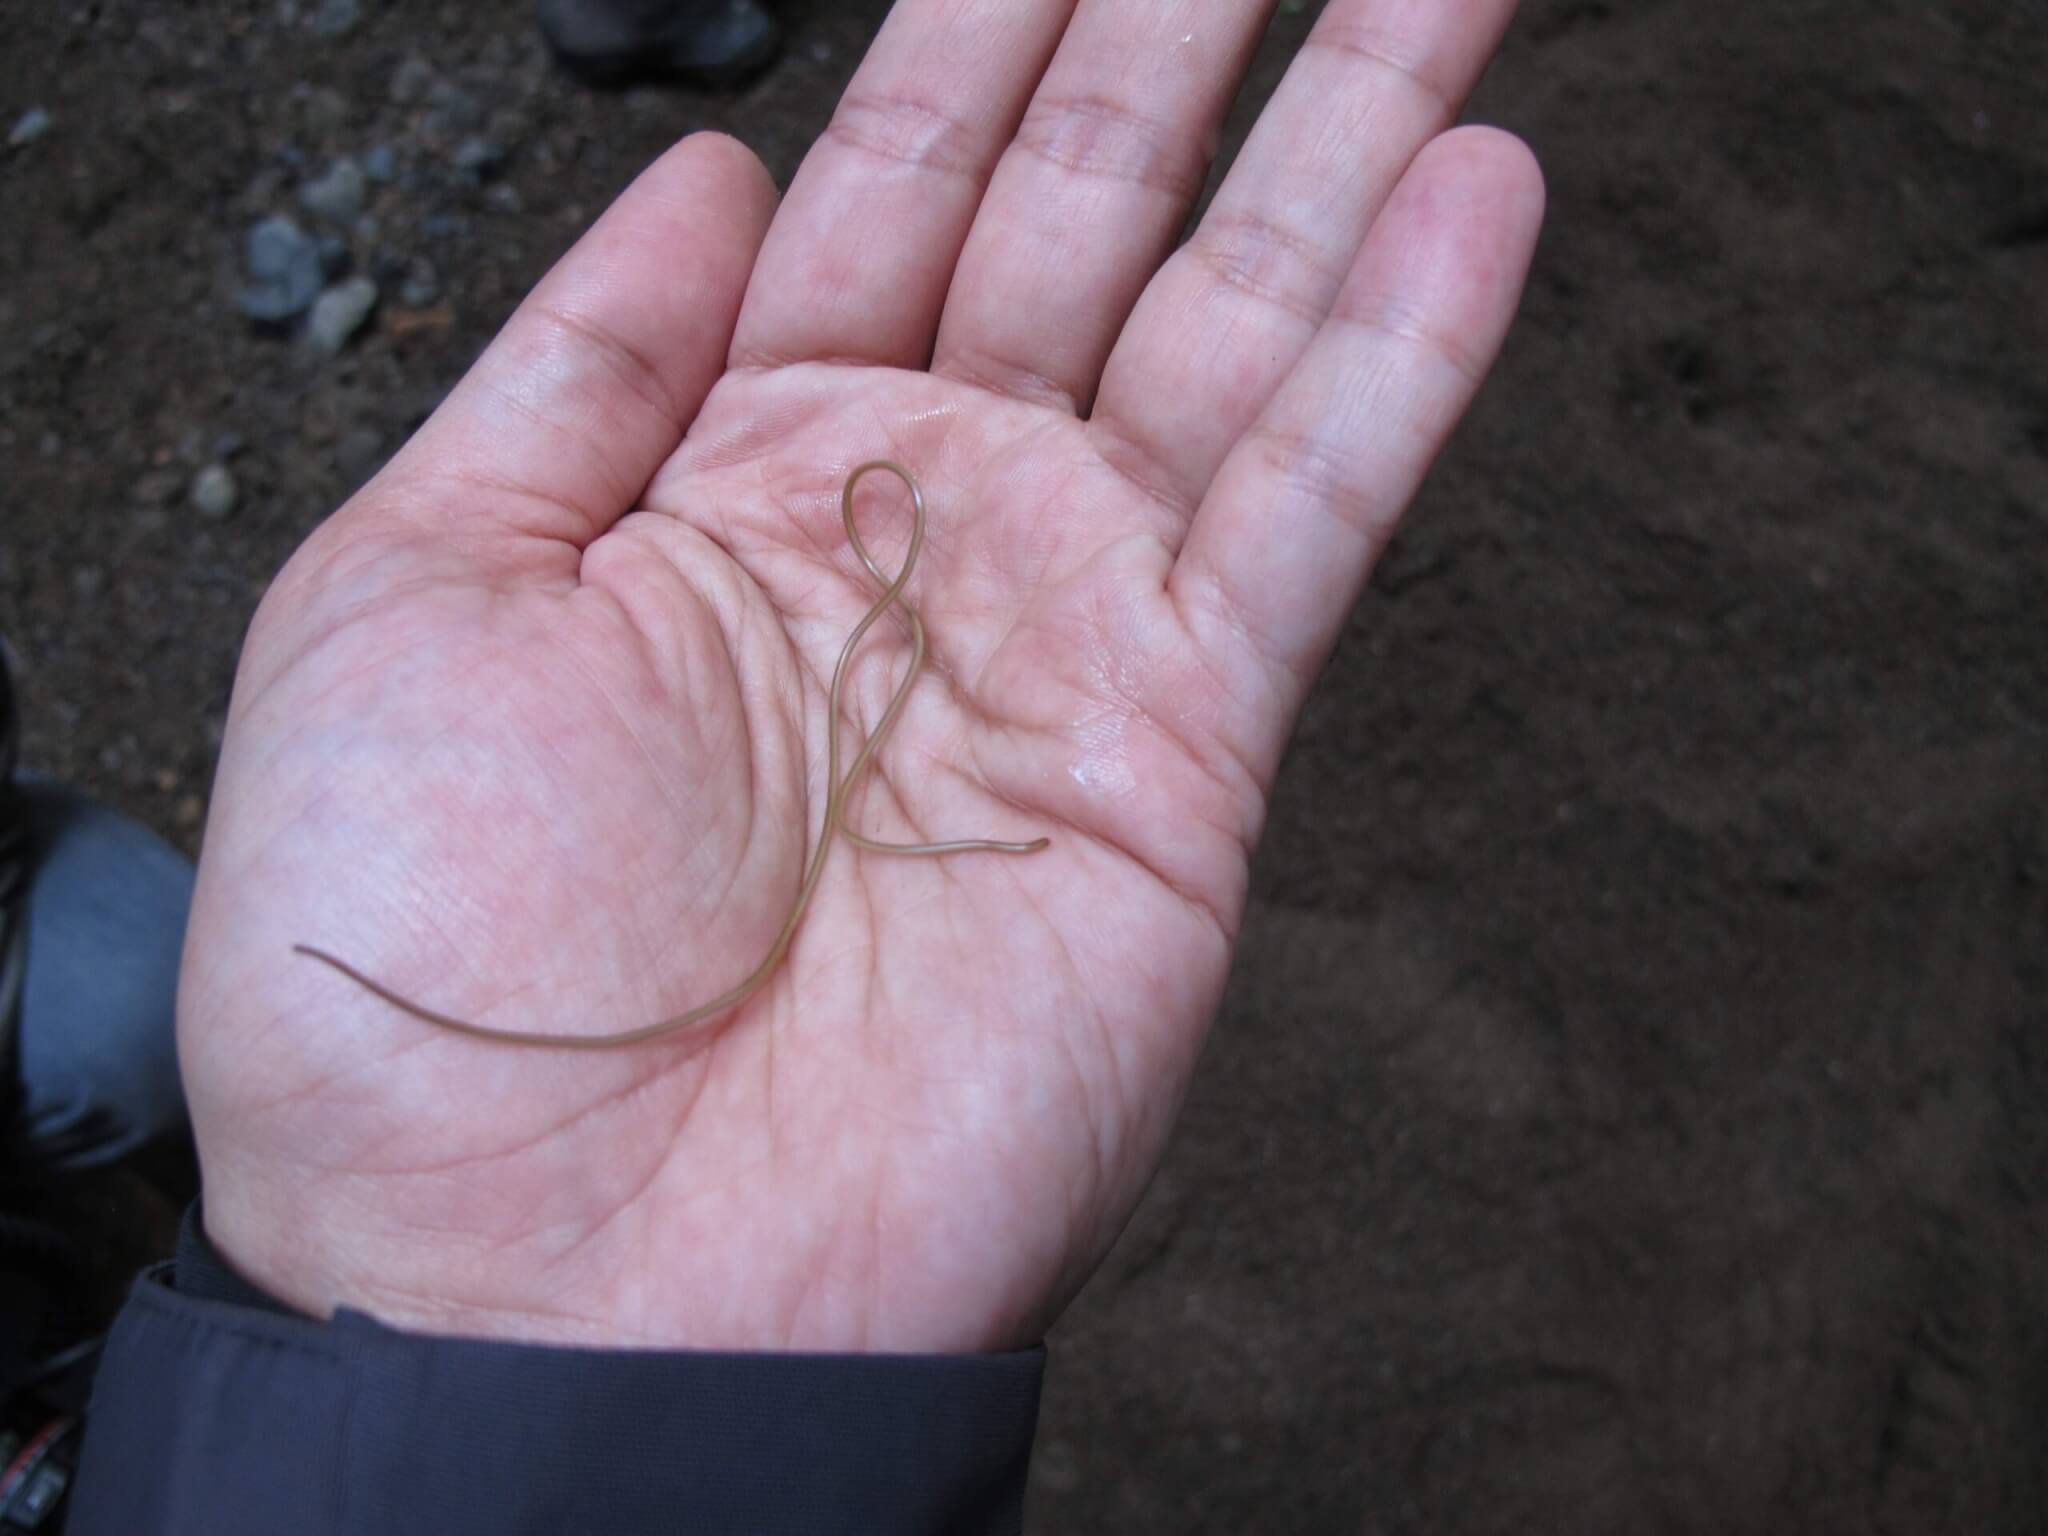 A live freshwater hairworm in Bruno de Medeiros's hand in the Muir Woods National Monument in California.